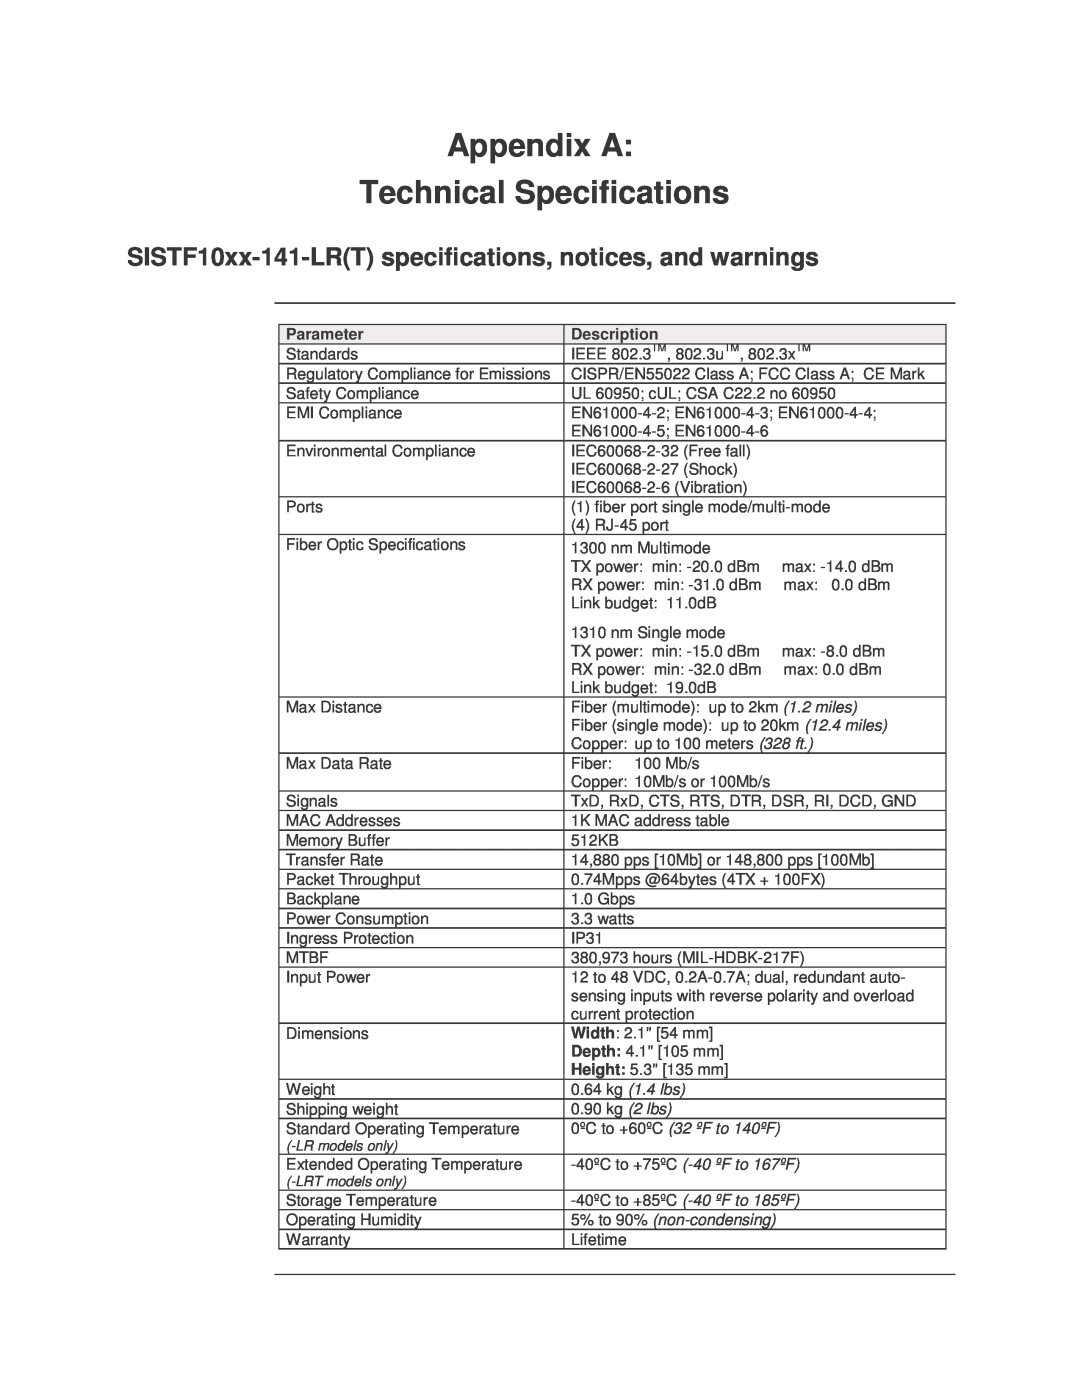 Transition Networks SISTF10xx-141-LR(T) installation manual Appendix A Technical Specifications 